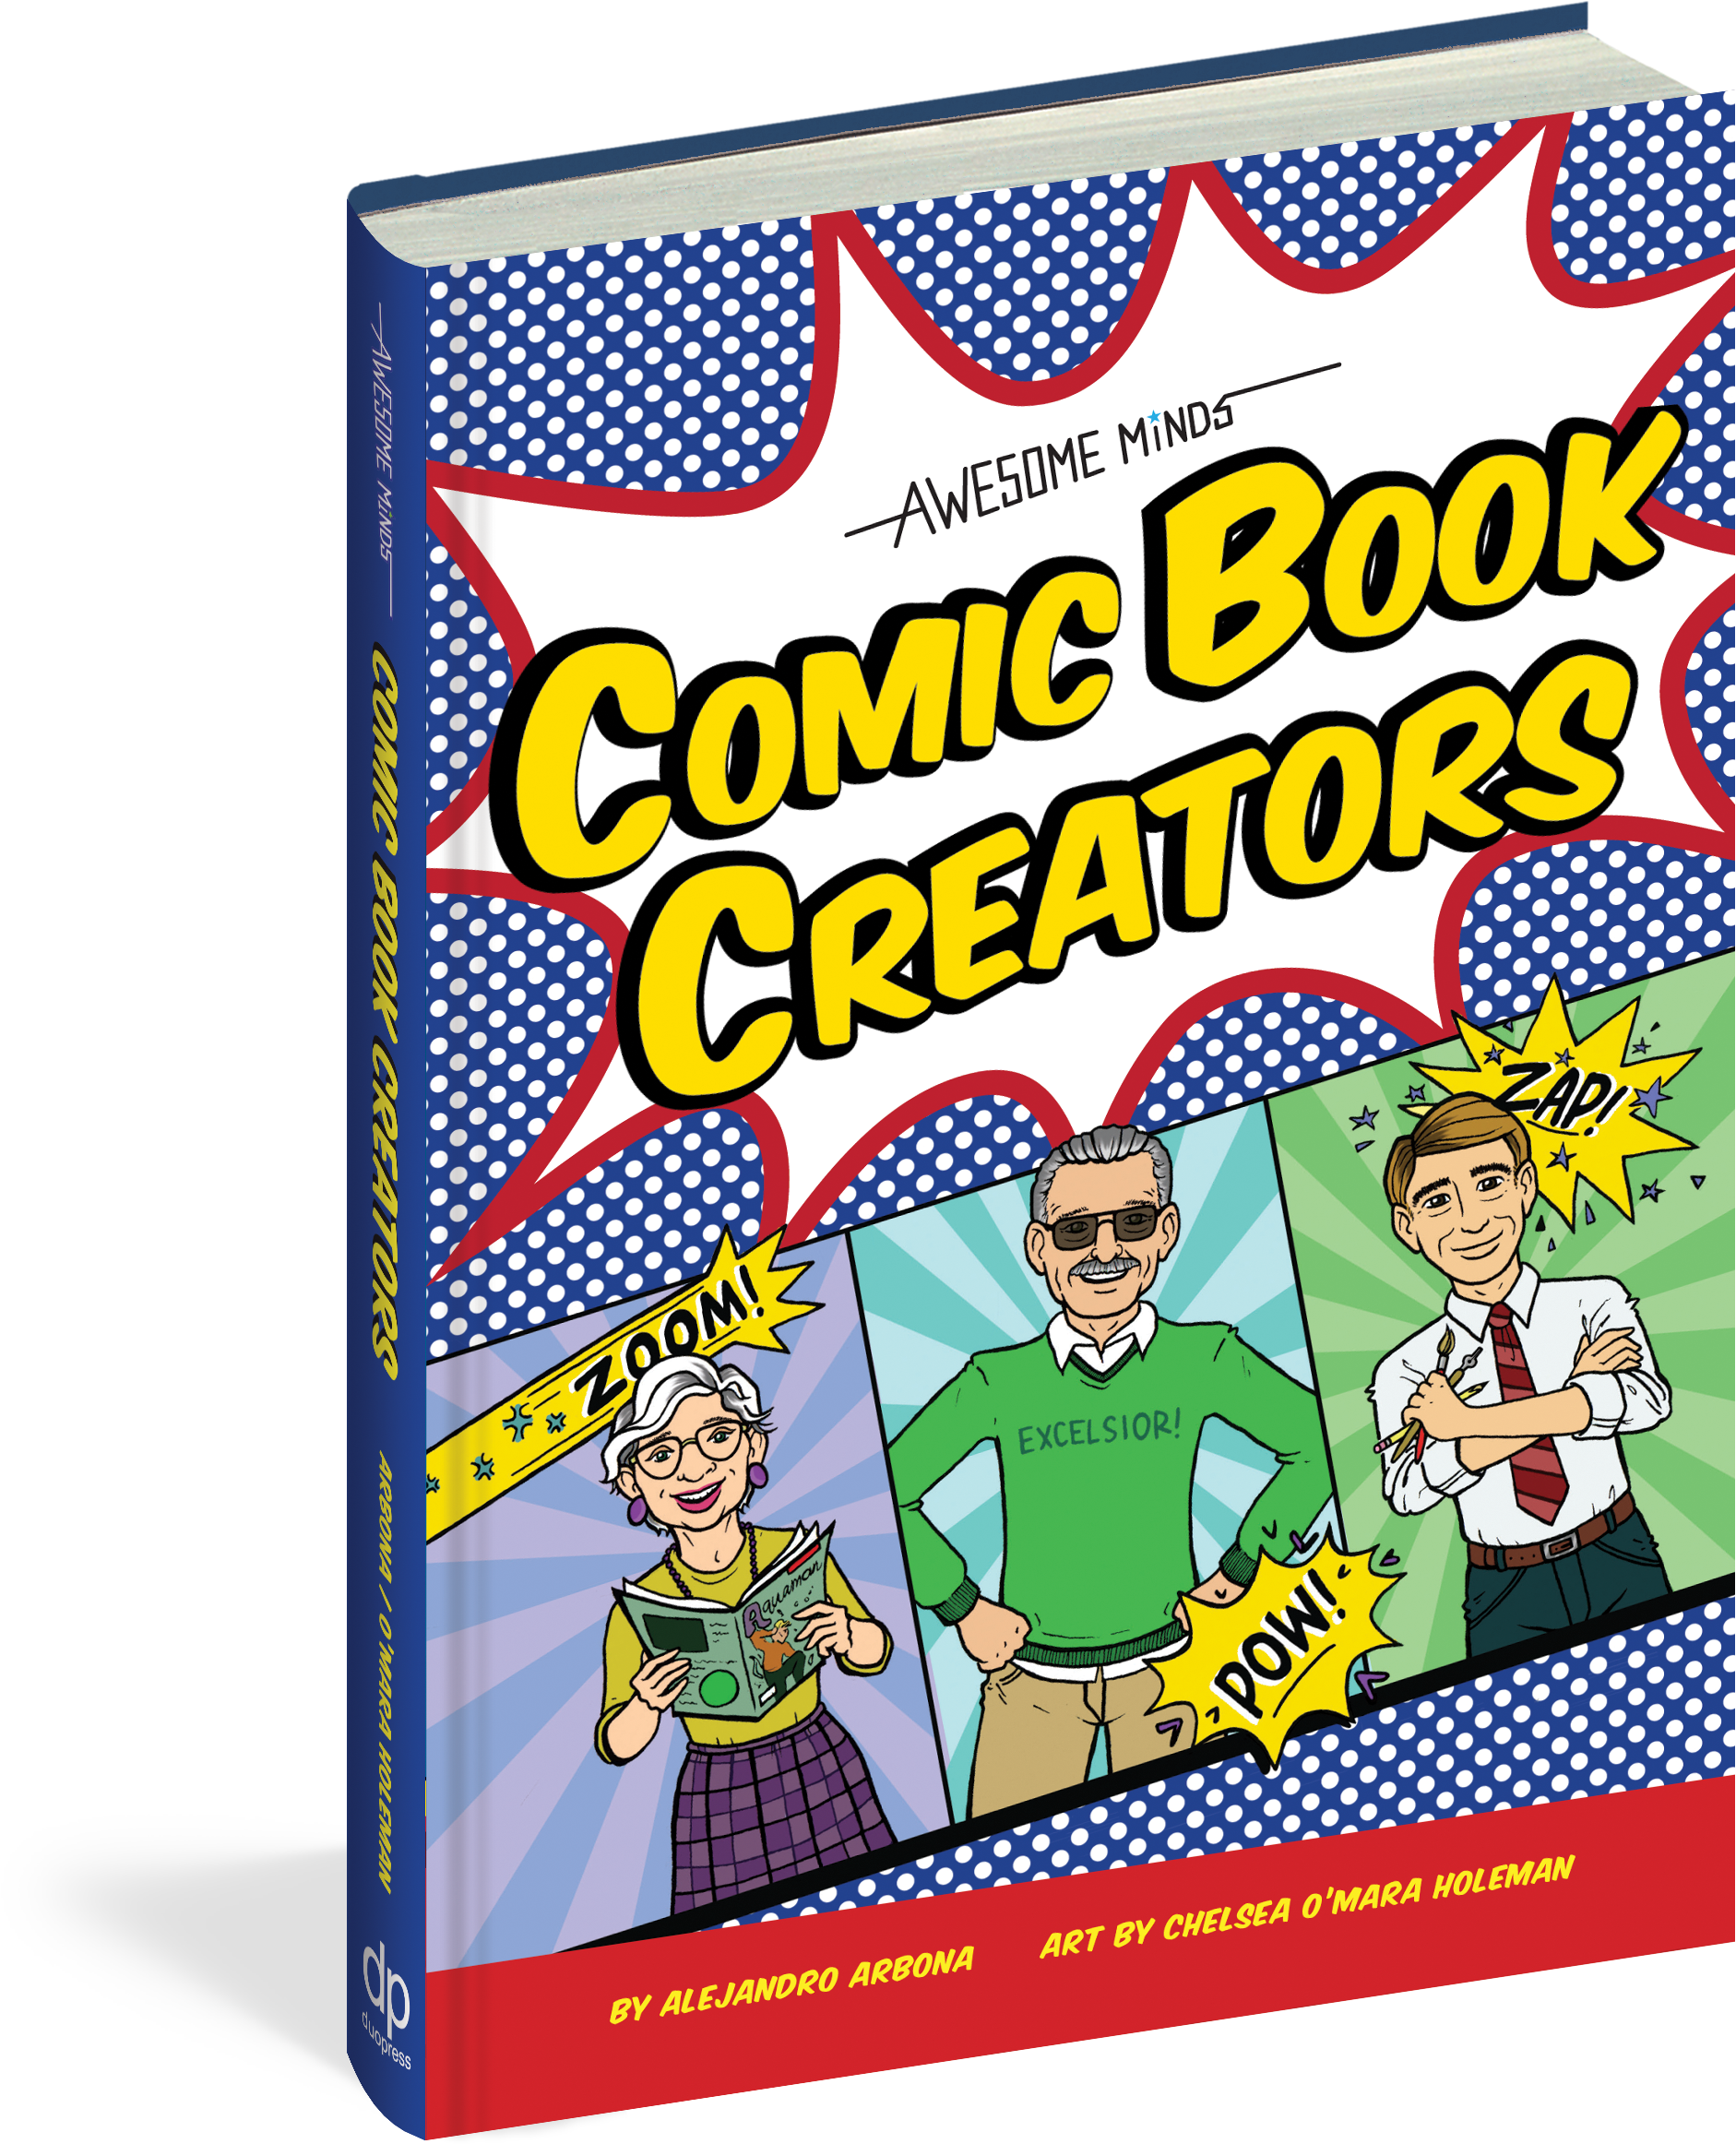 A Comic Book Cover With Cartoon Characters